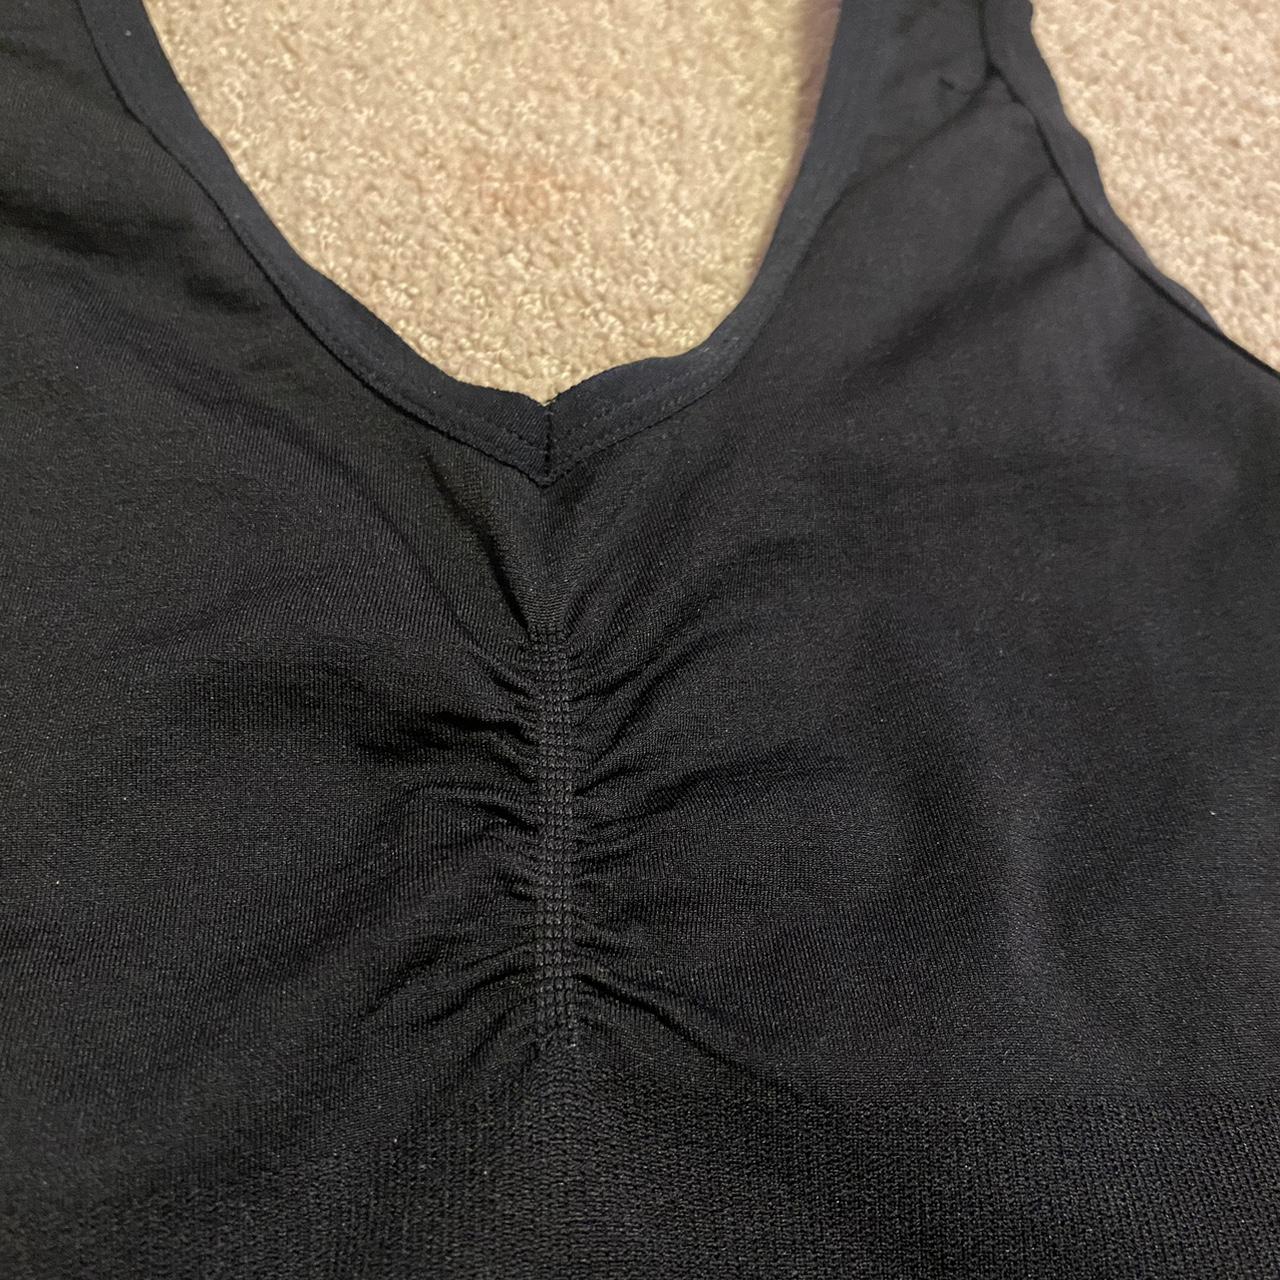 Skims dupe tank top, super stretchy and - Depop